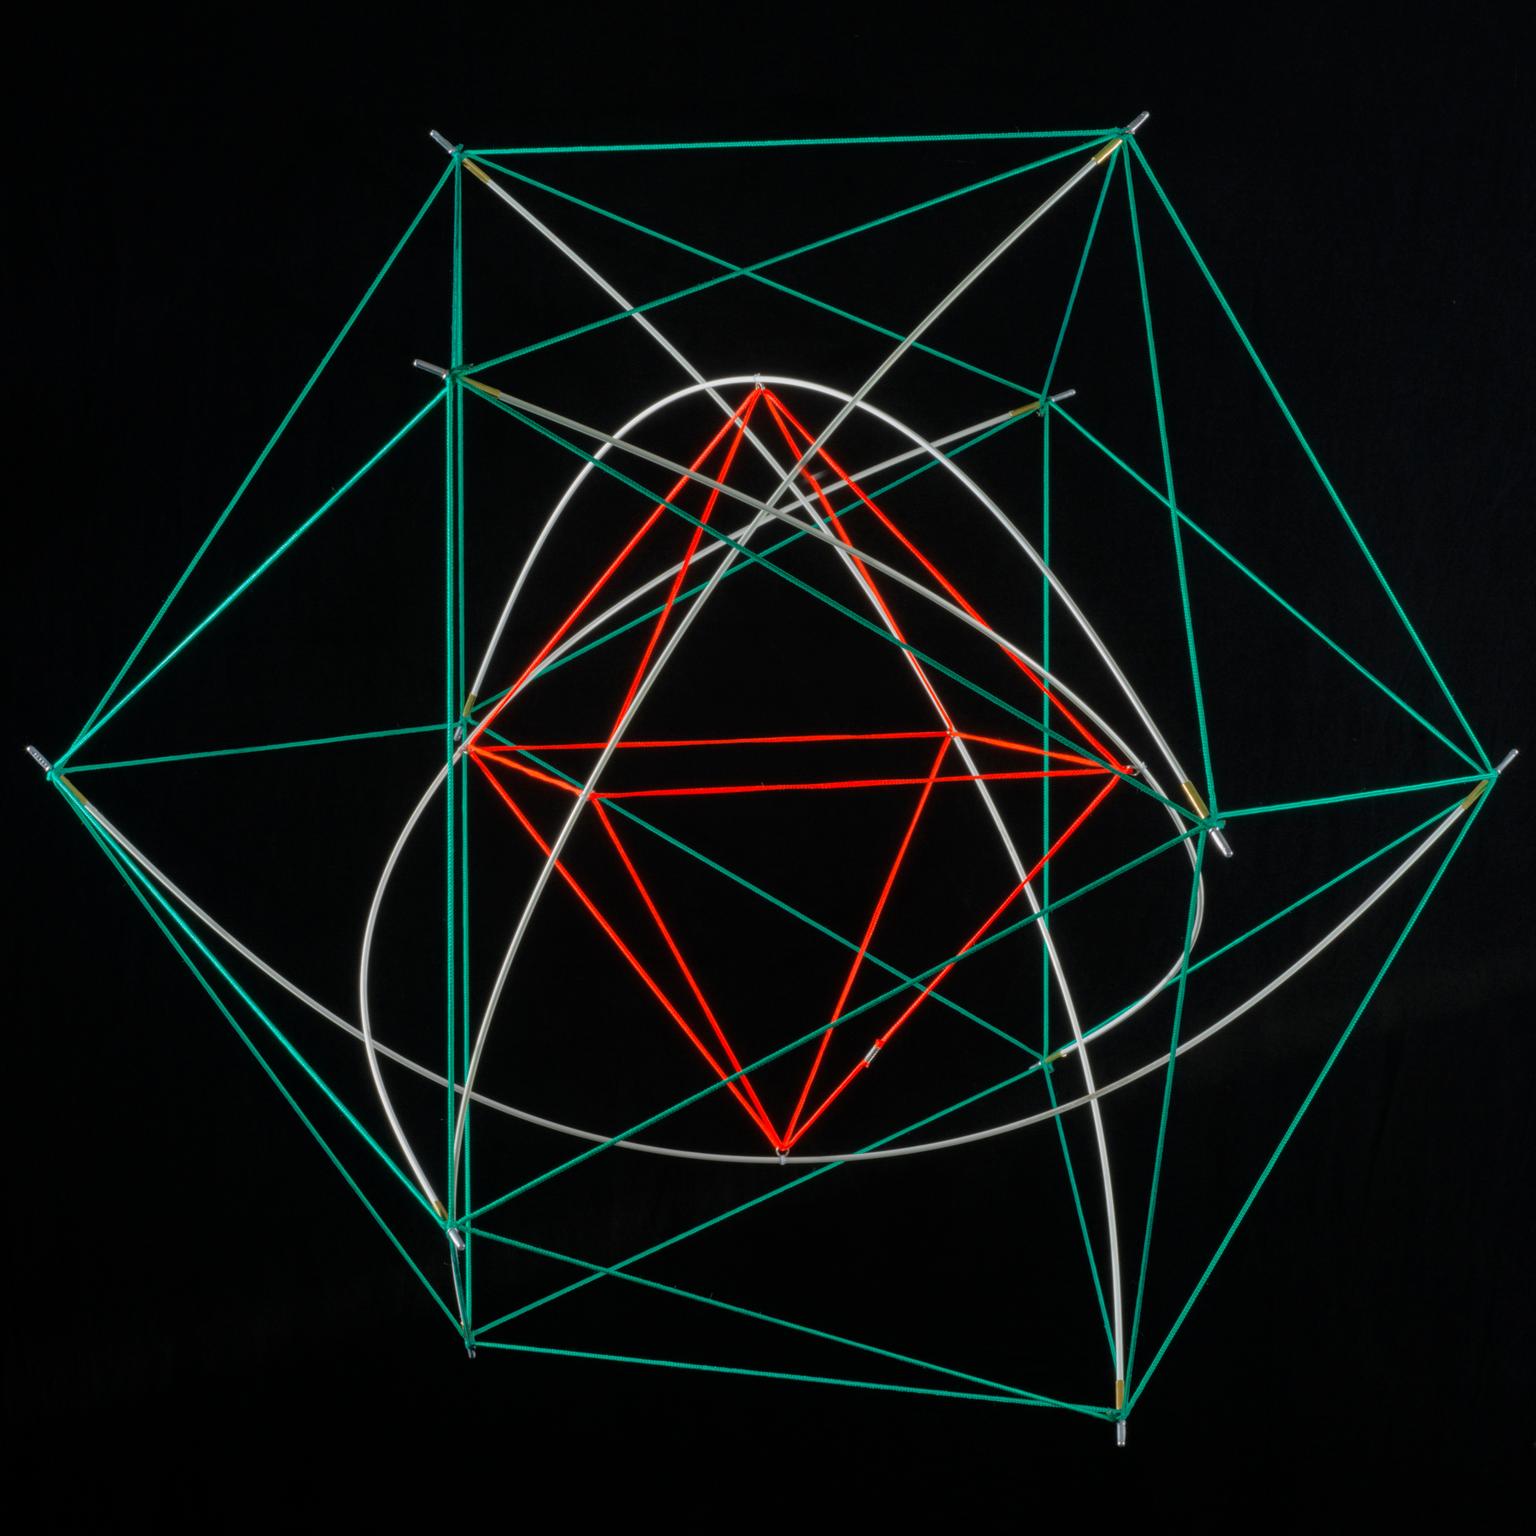 Image for entry 'Tensegrity icosahedron & octahedron by six rods'